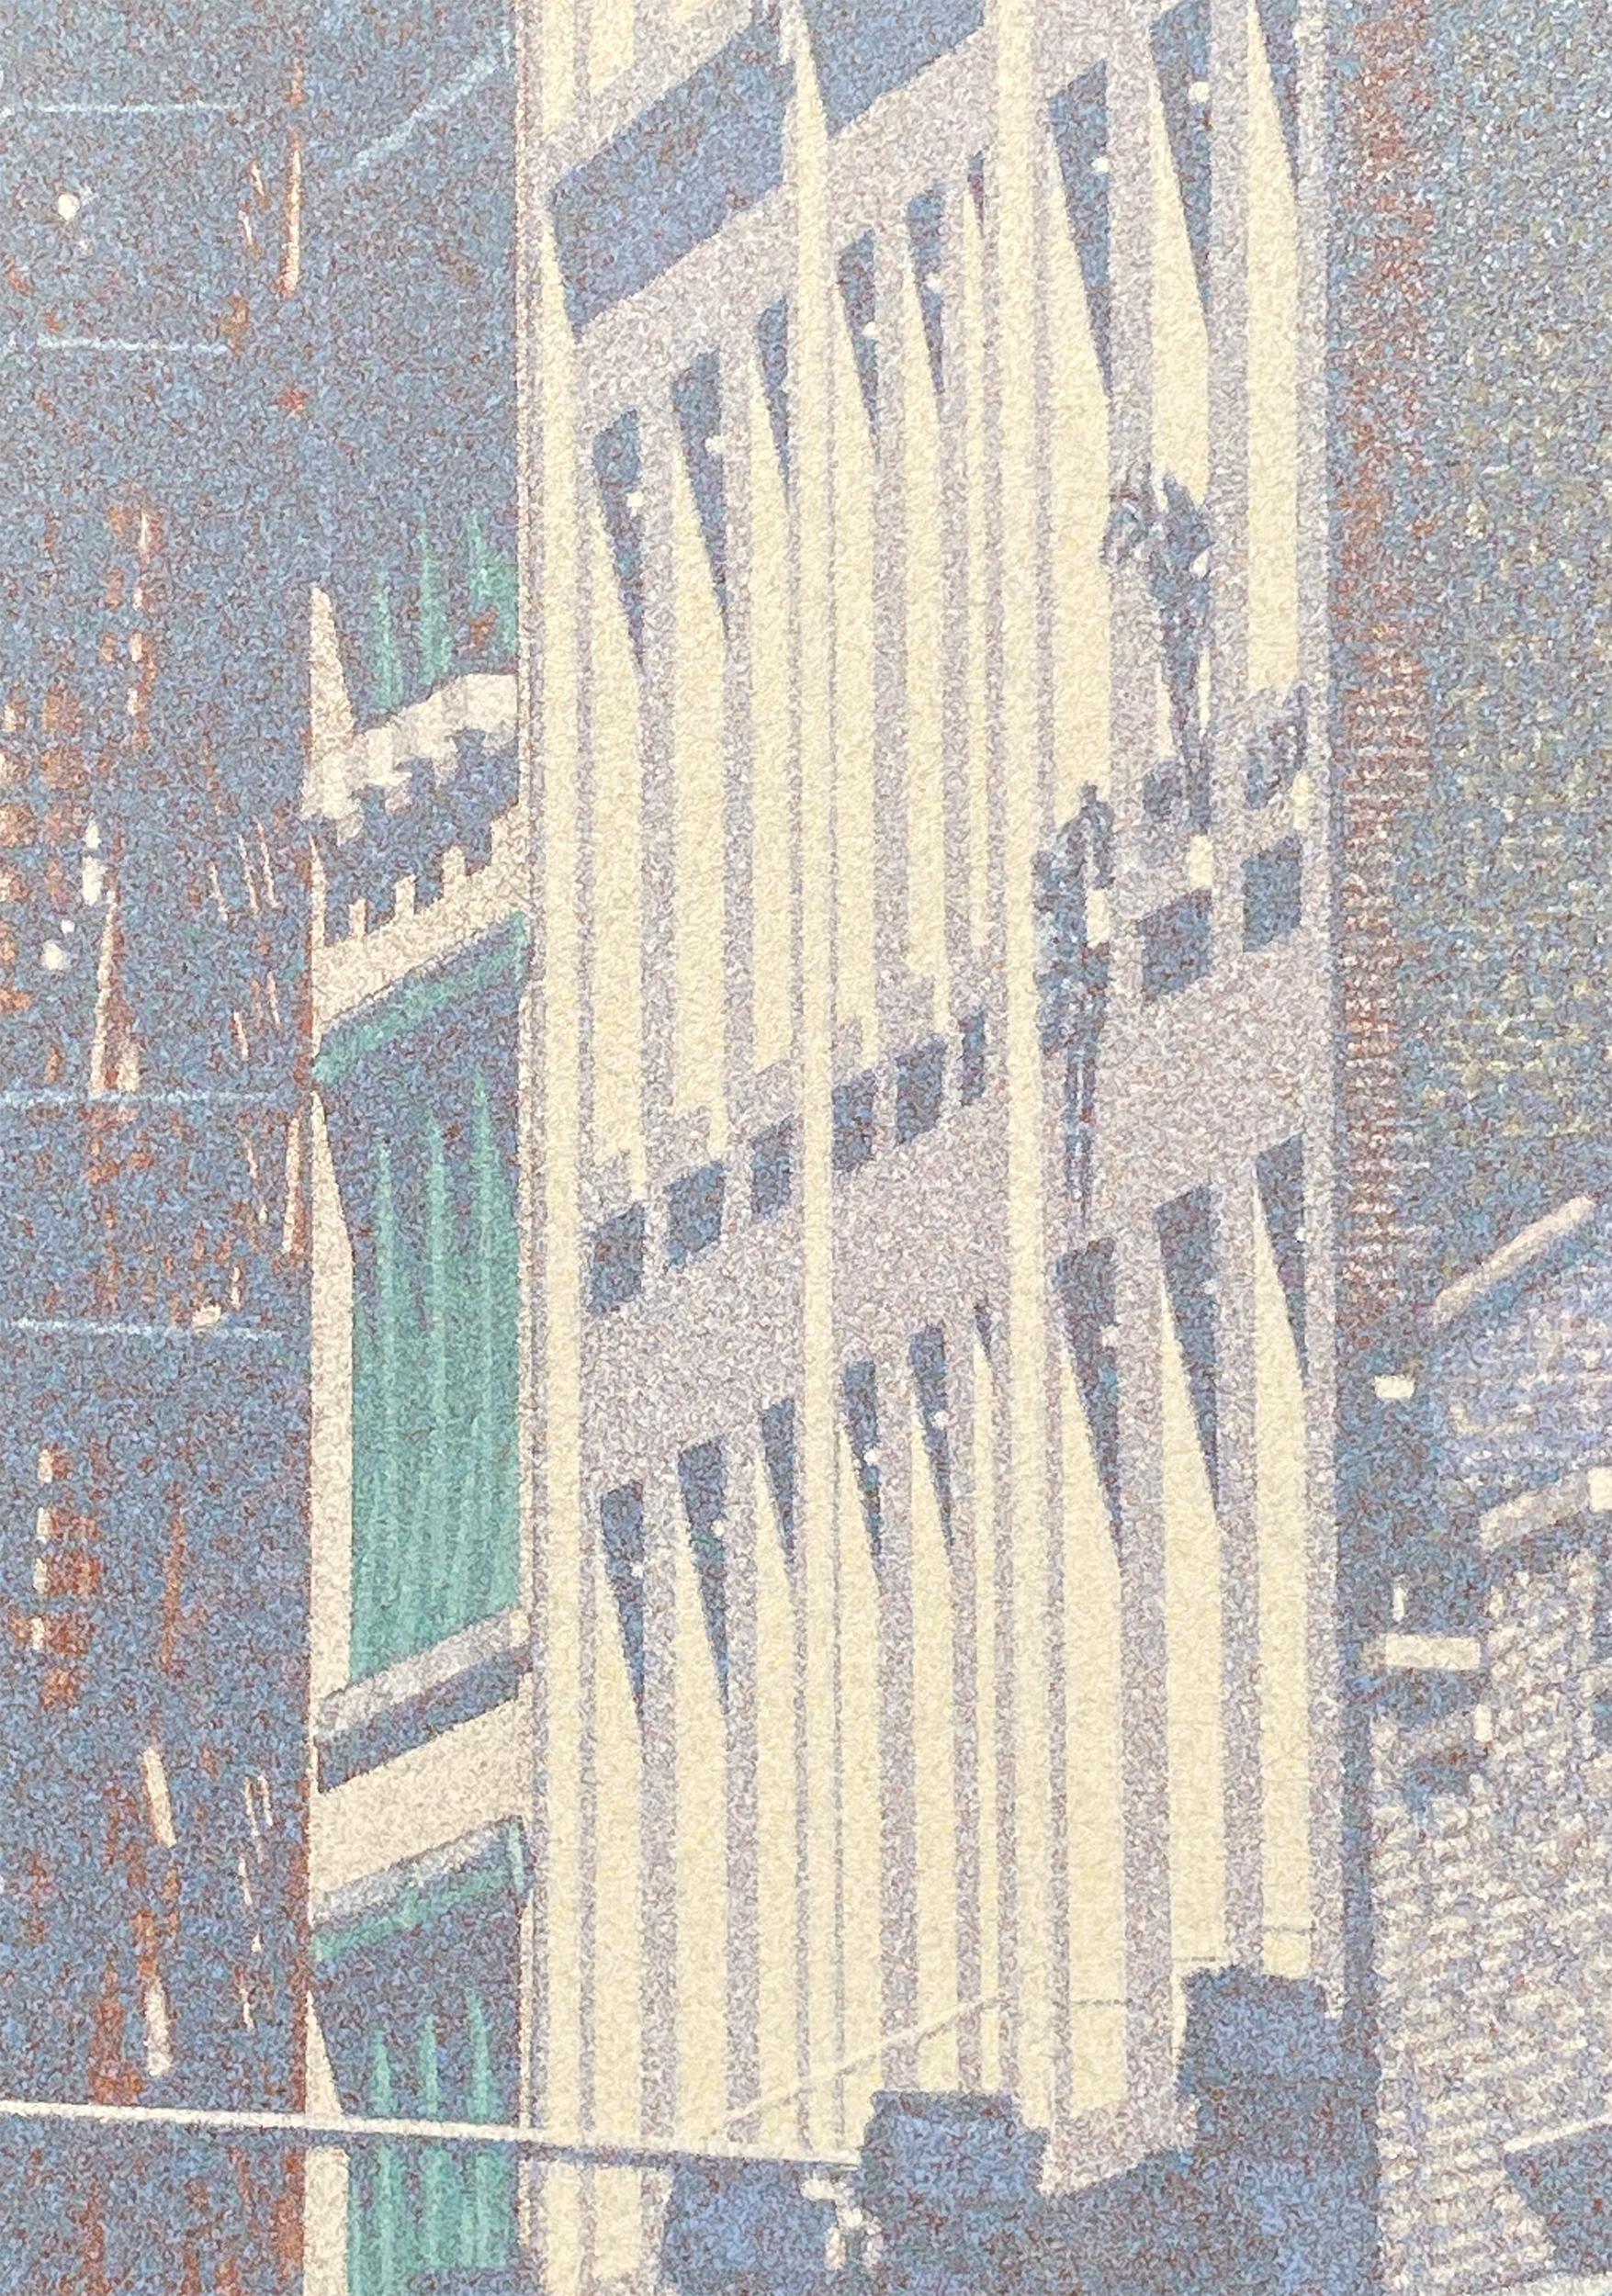 A Photorealistic painting executed in a Pointillist style by HN Han. A view of West Broadway, New York City in the direct midday sun. This large acrylic on canvas is signed and dated verso by the artist.

465 W Broadway - Fire Escape
H.N. Han,